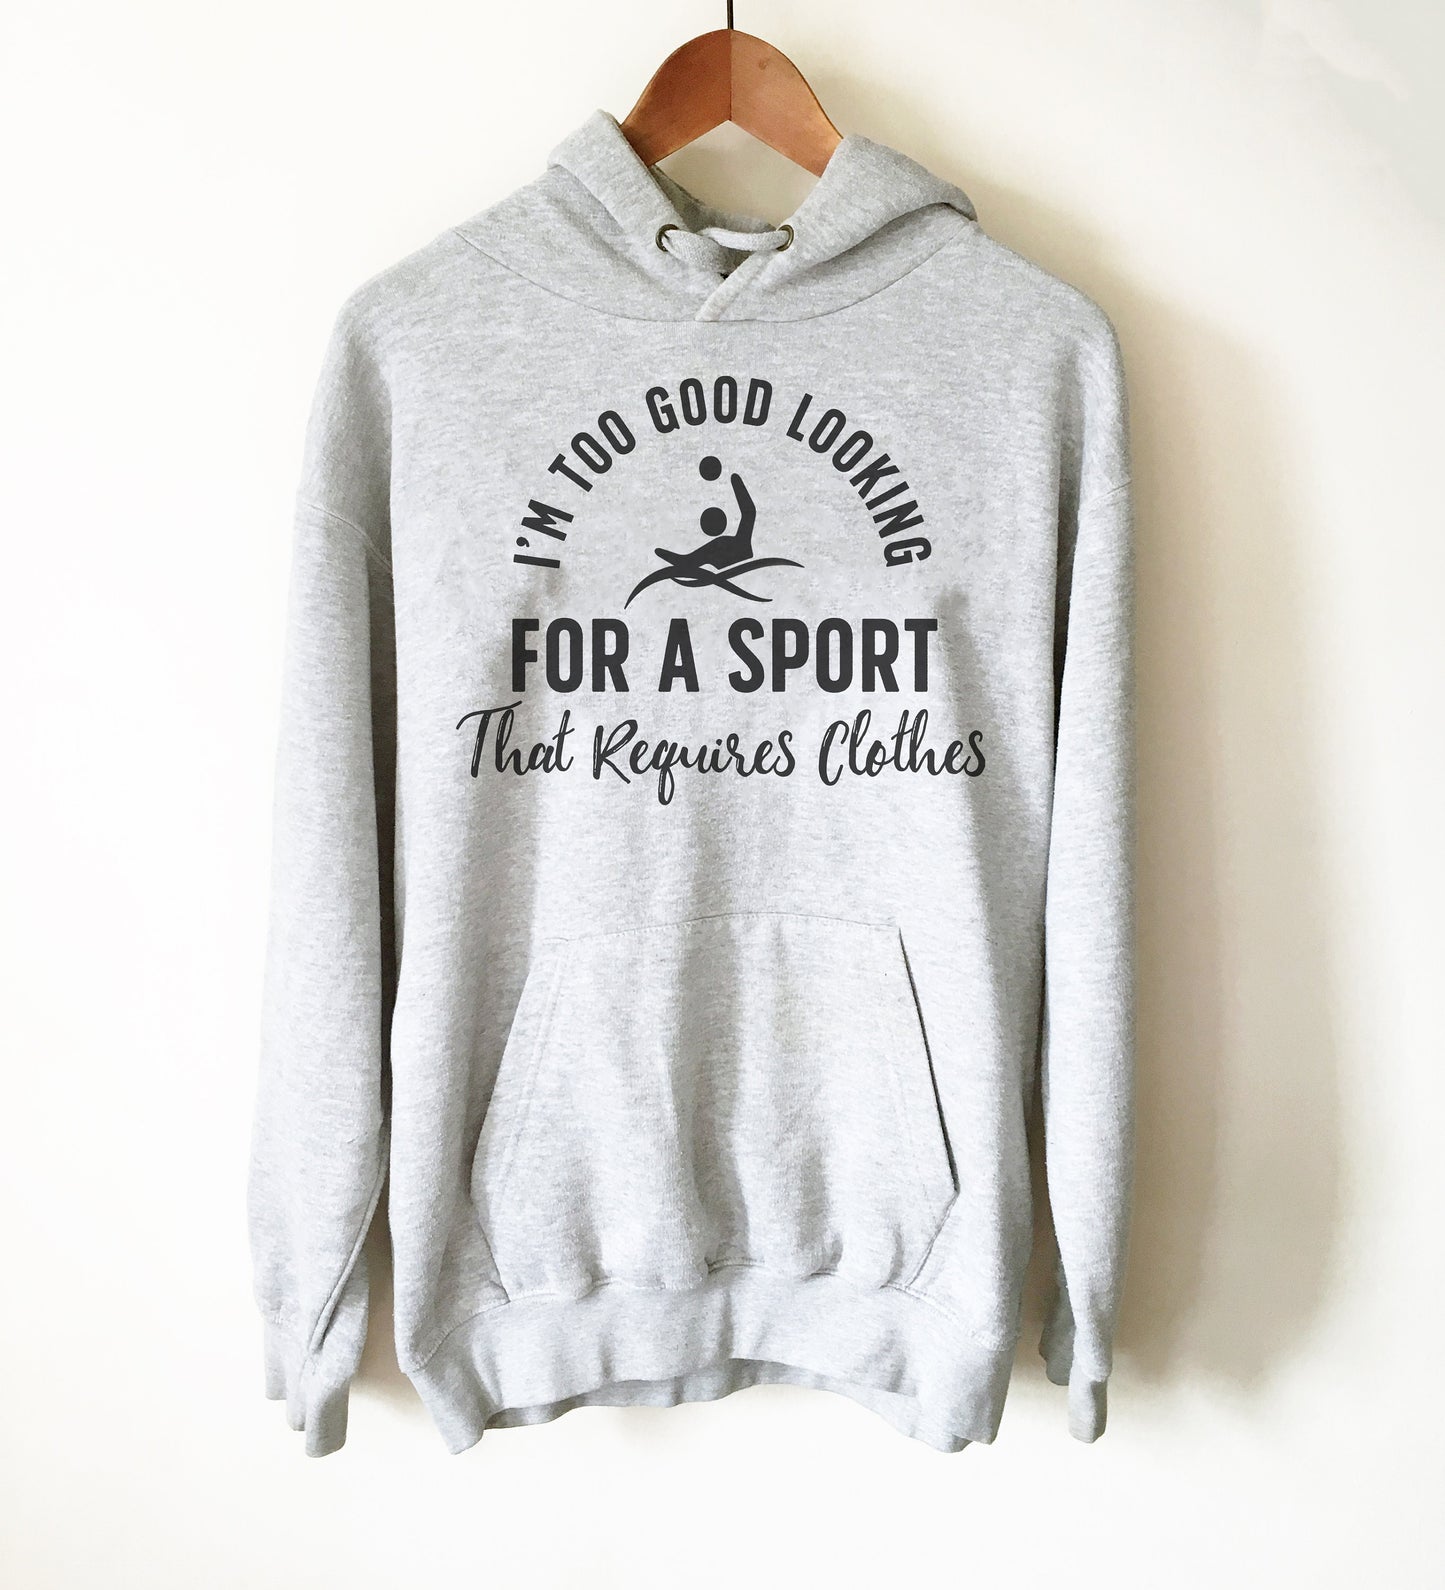 I’m Too Good Looking For A Sport That Requires Clothes Hoodie - Water Polo Shirt, Water Polo Gift, Polo Shirt, Polo Gift, Water Polo Player